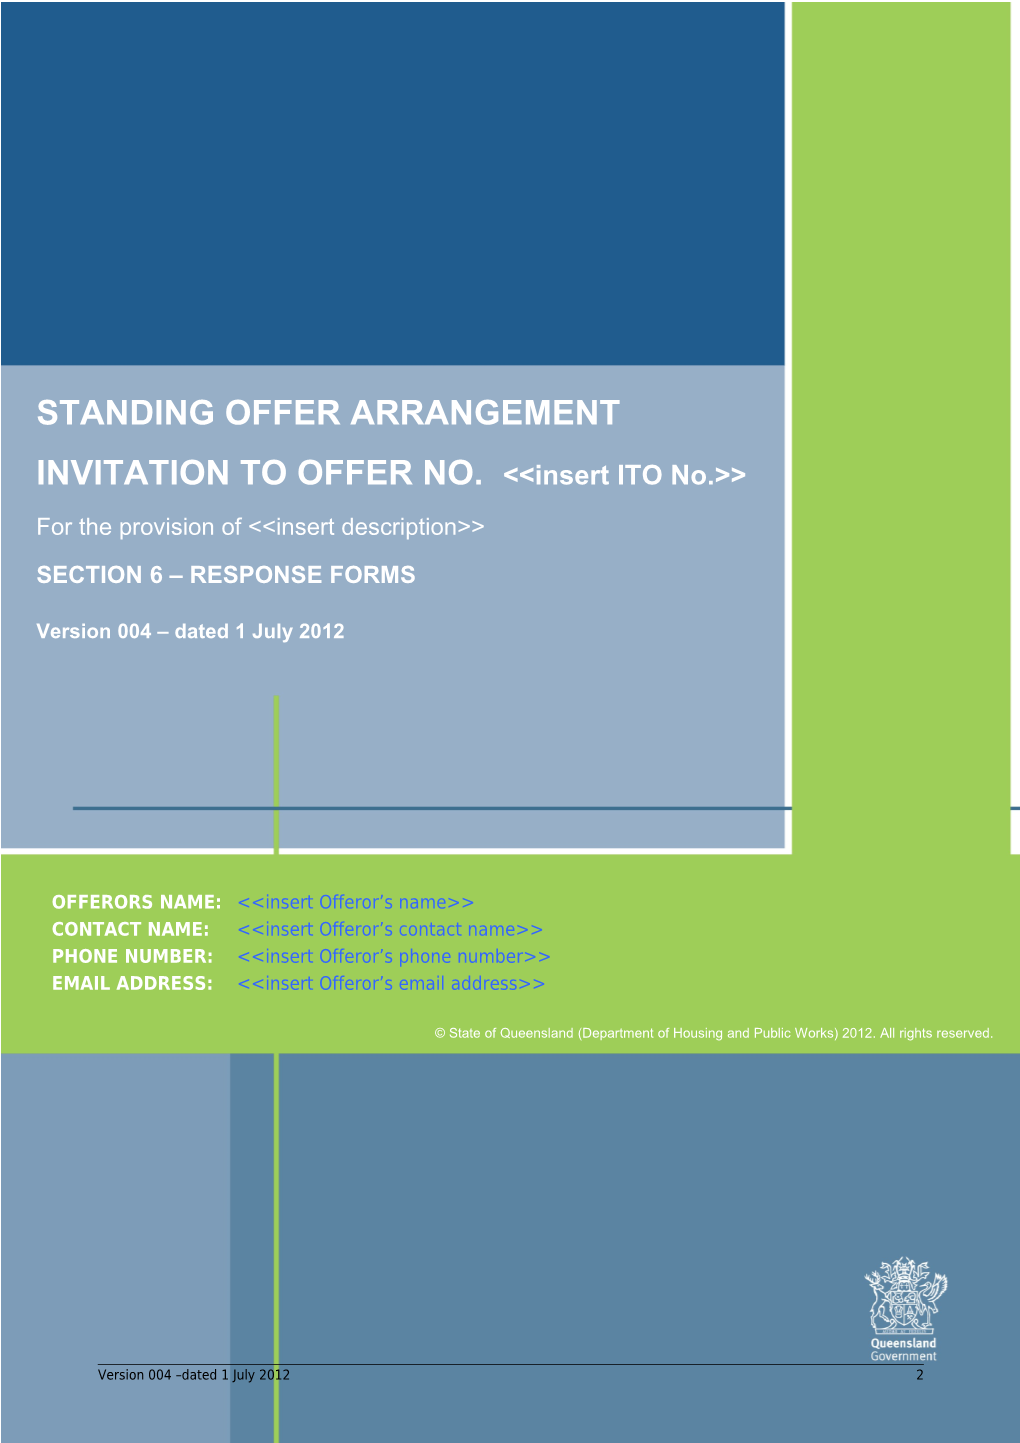 Standing Offer Arrangement Invitation to Offer Template - Section 6 - Version 004